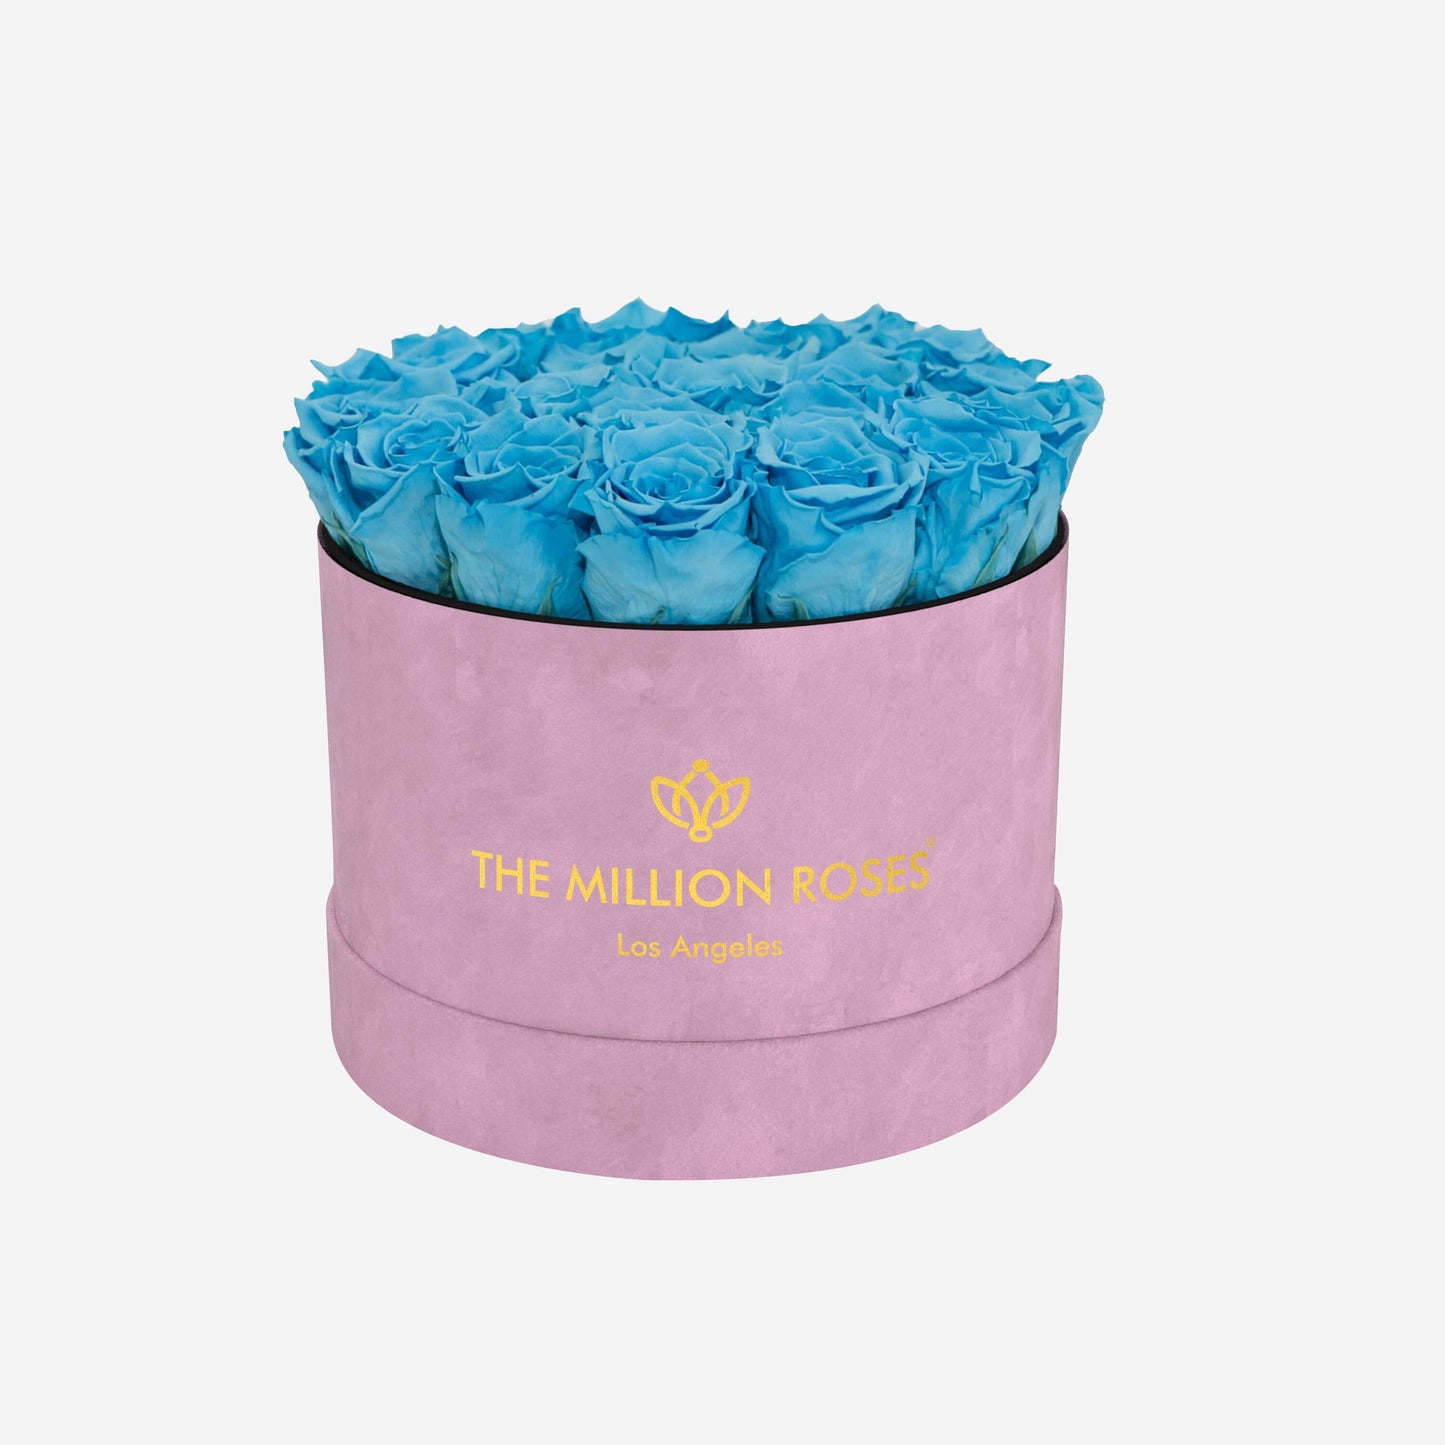 Classic Light Pink Suede Box | Light Blue Roses - The Million Roses